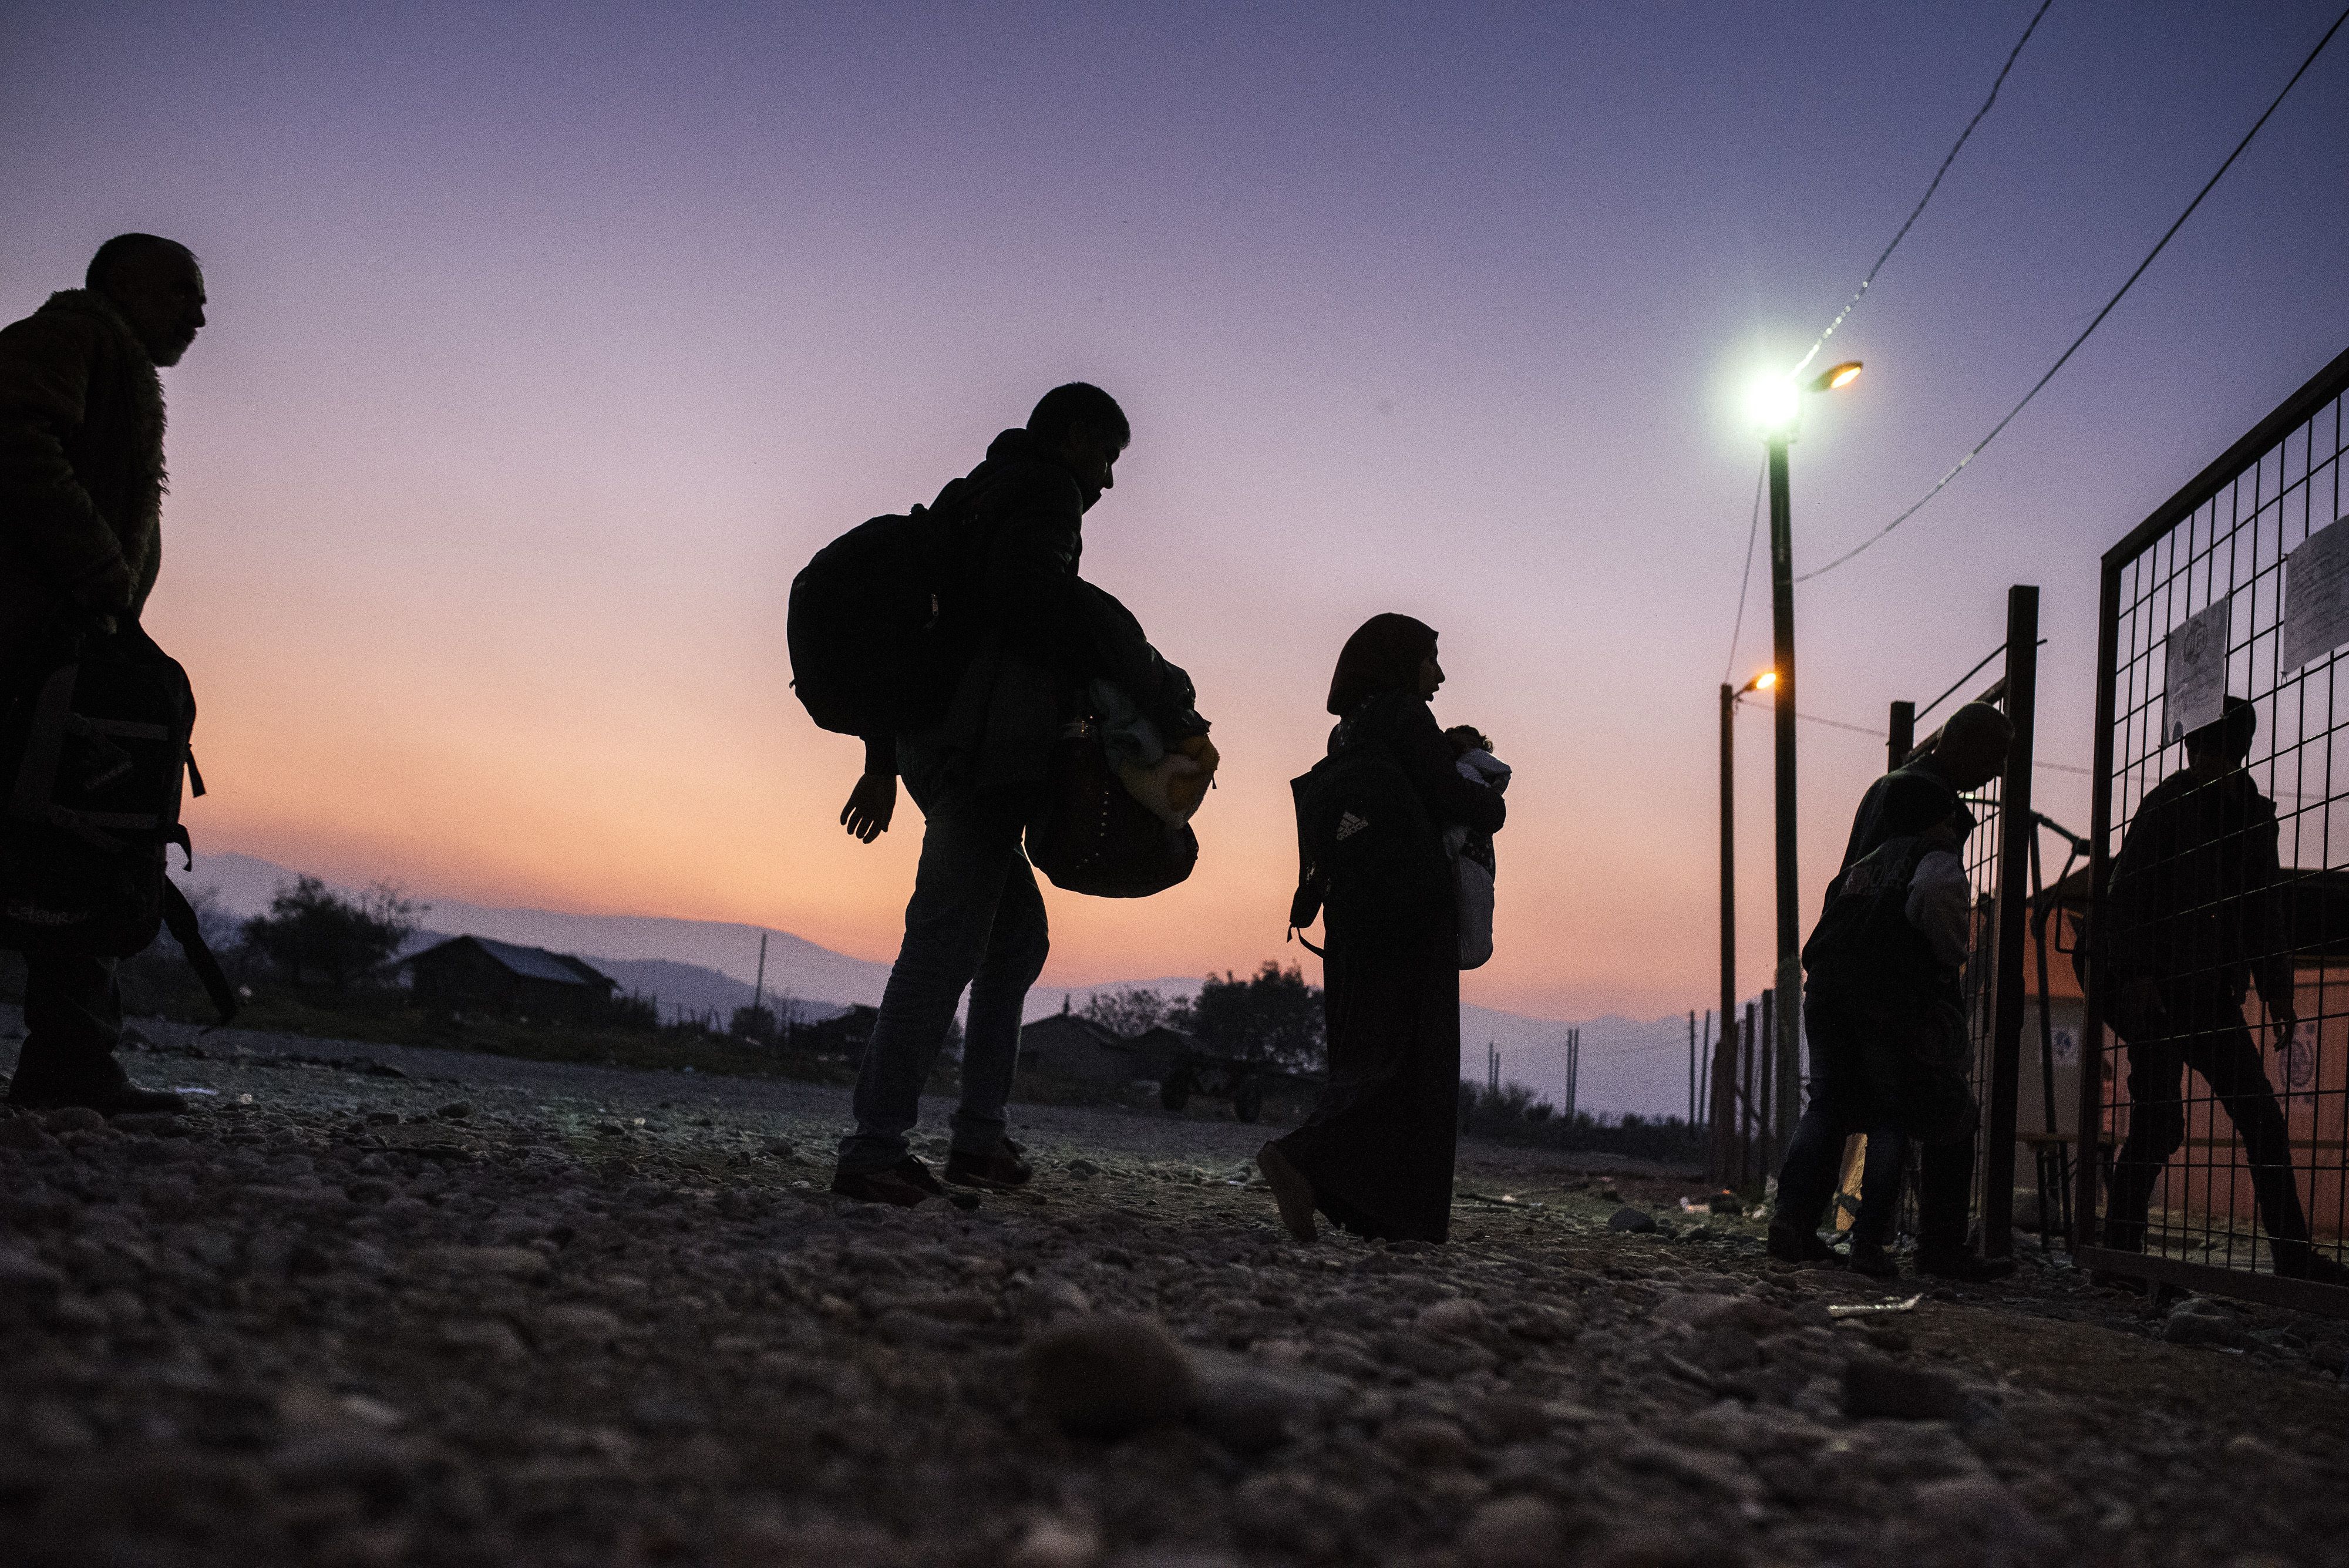 Migrants and refugees enter a registration camp after crossing the Greek-Macedonian border near Gevgelija, Macedonia on Nov. 17, 2015. (Dimitar Dilkoff—Getty Images)